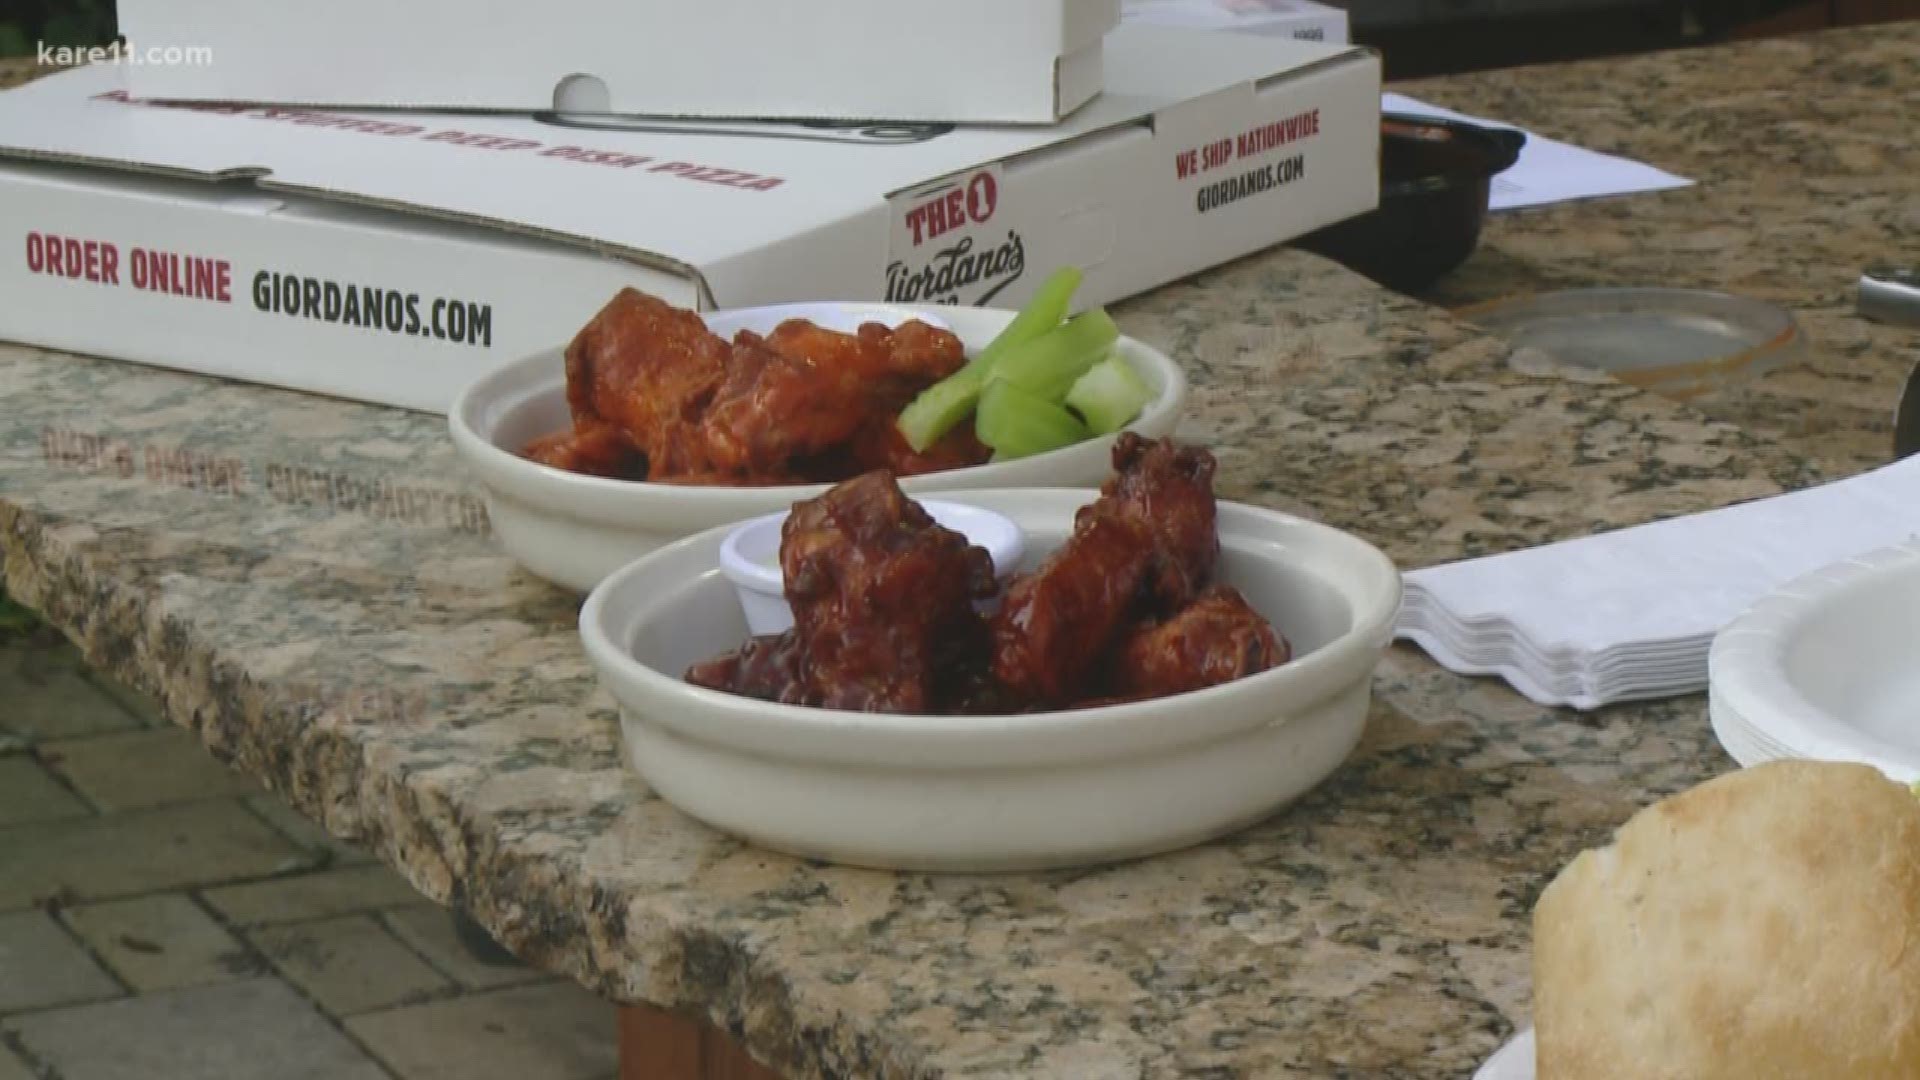 Giordano's known for its pizzas also offers a variety of wings and sandwiches for your next football party.